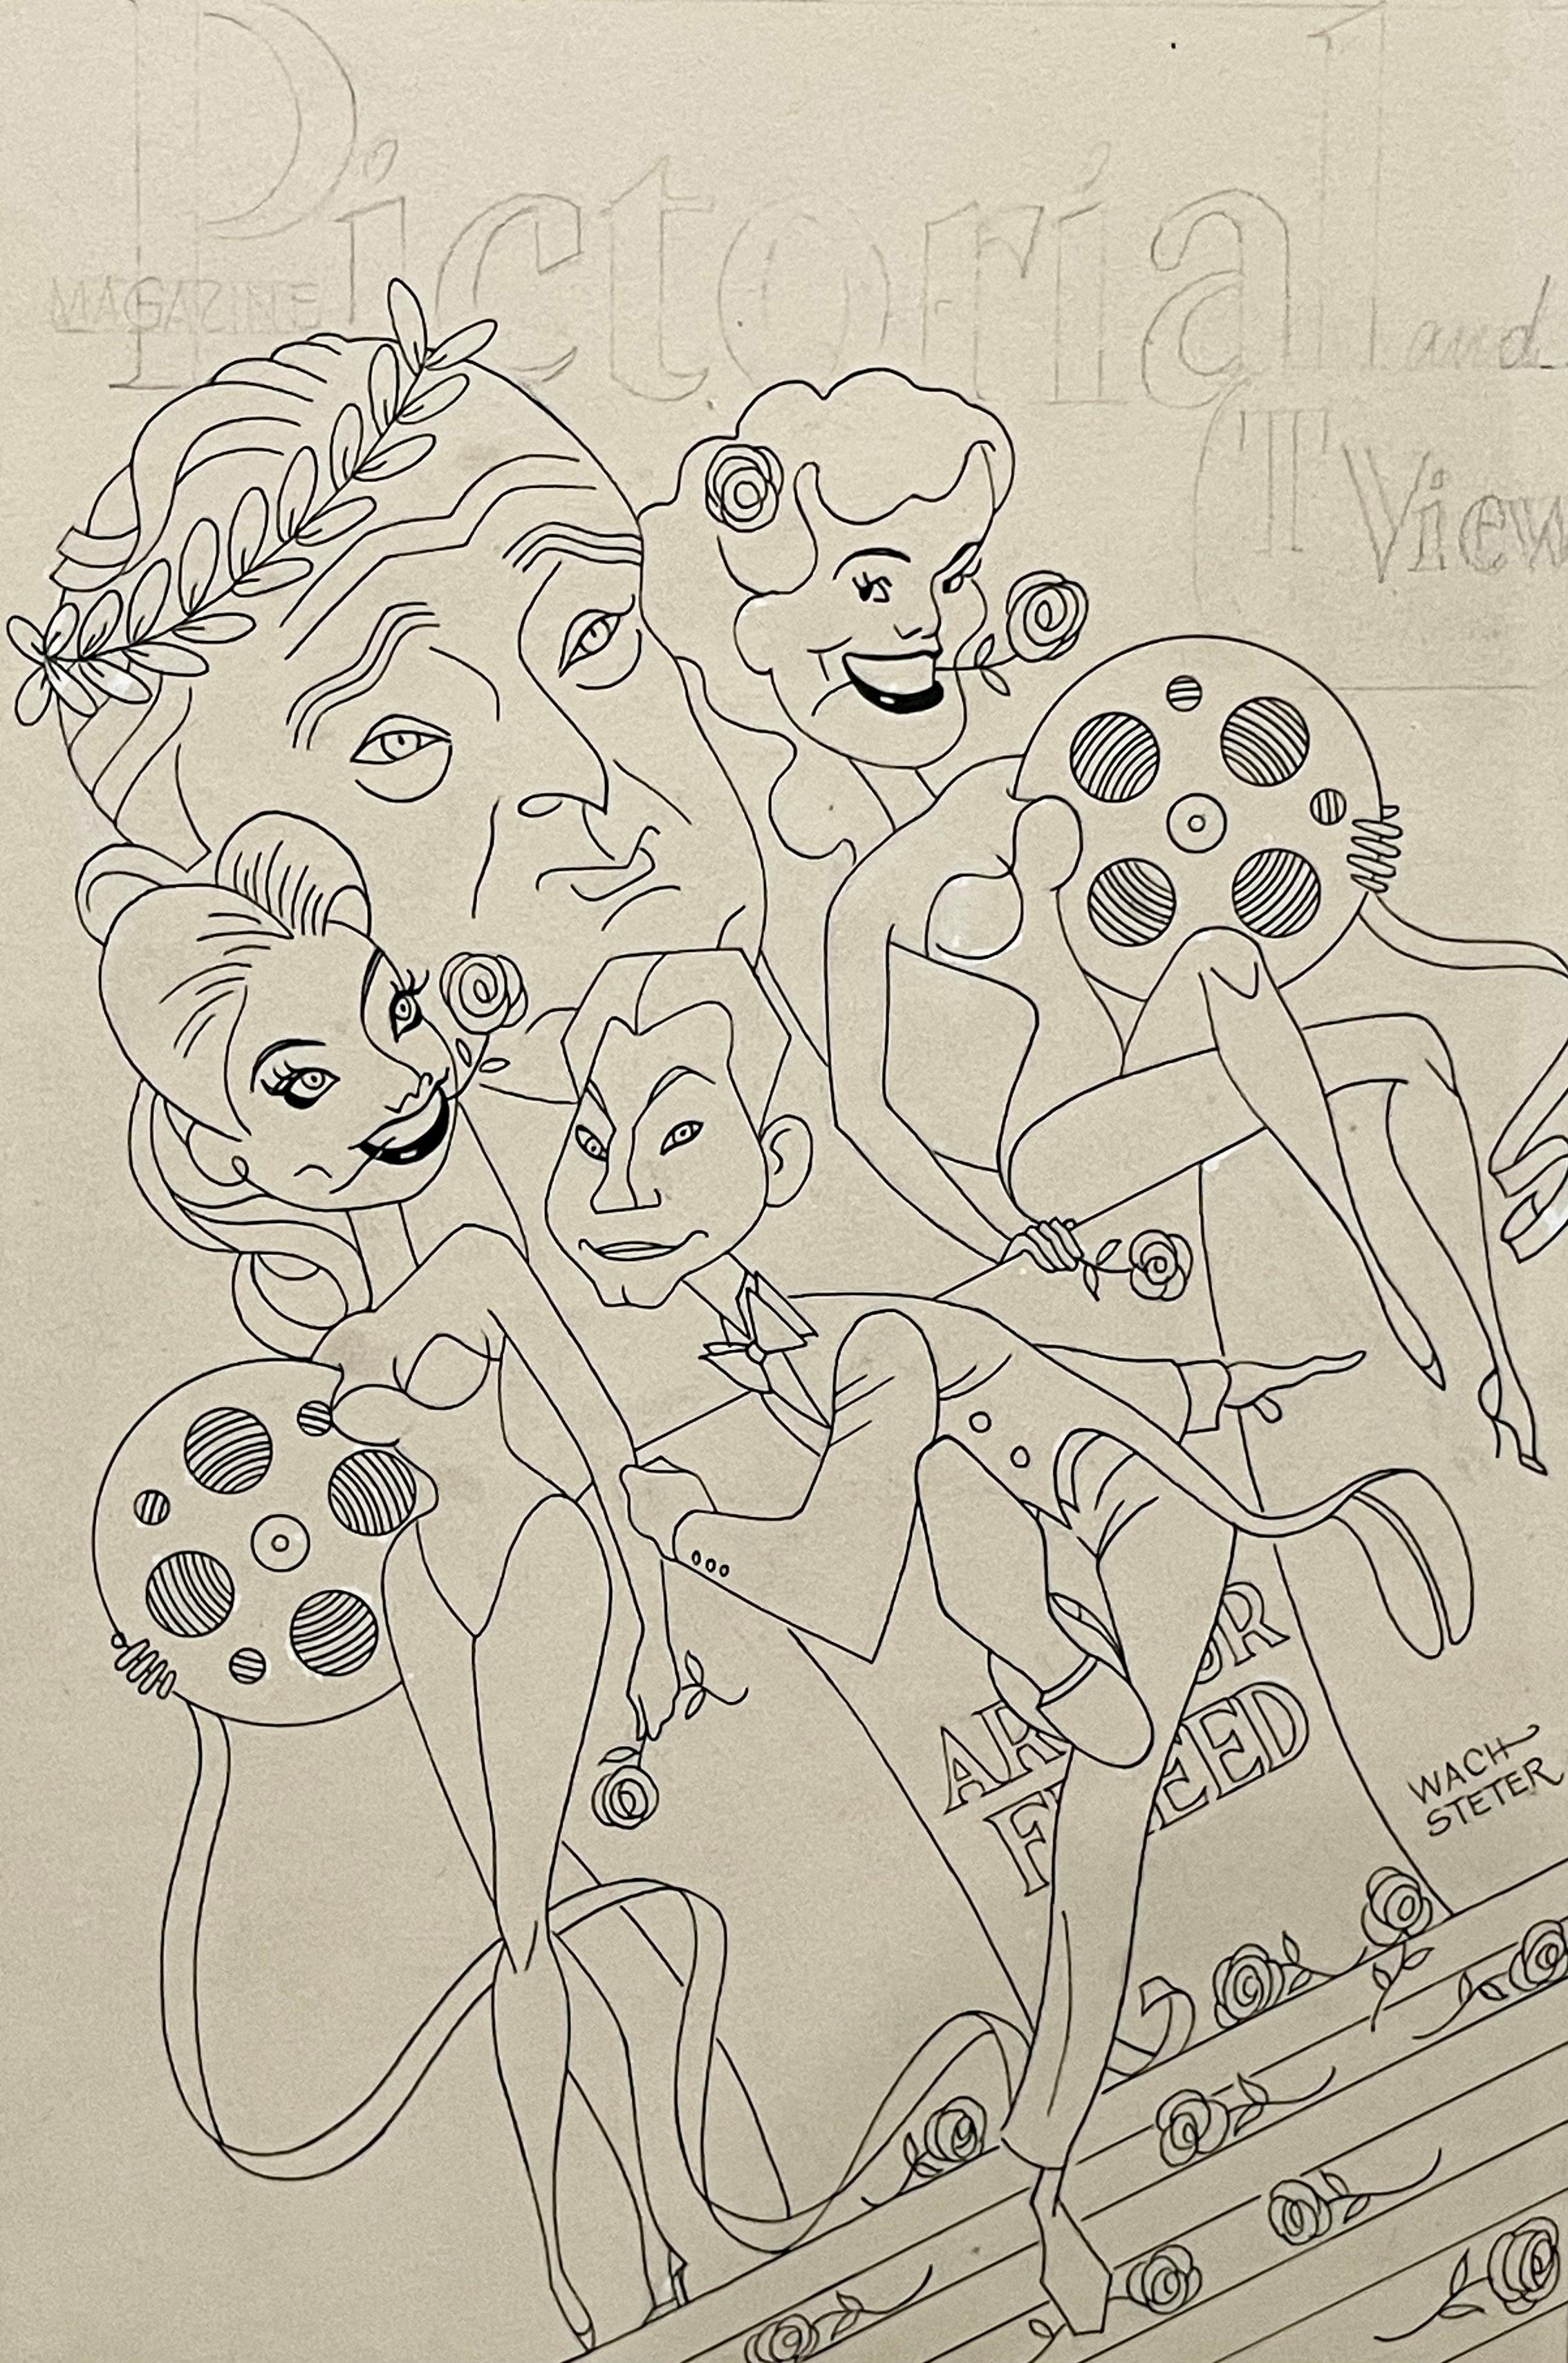 2 Pieces in this lot

---

PEN & INK ILLUSTRATION - Caricature by George Wachsteter (1911-2004) for NBC-TV's color spectacular 'Arthur Freed's Hollywood Melody' with Shirley Jones, Donald O'Connor & Nanette Fabray, 14